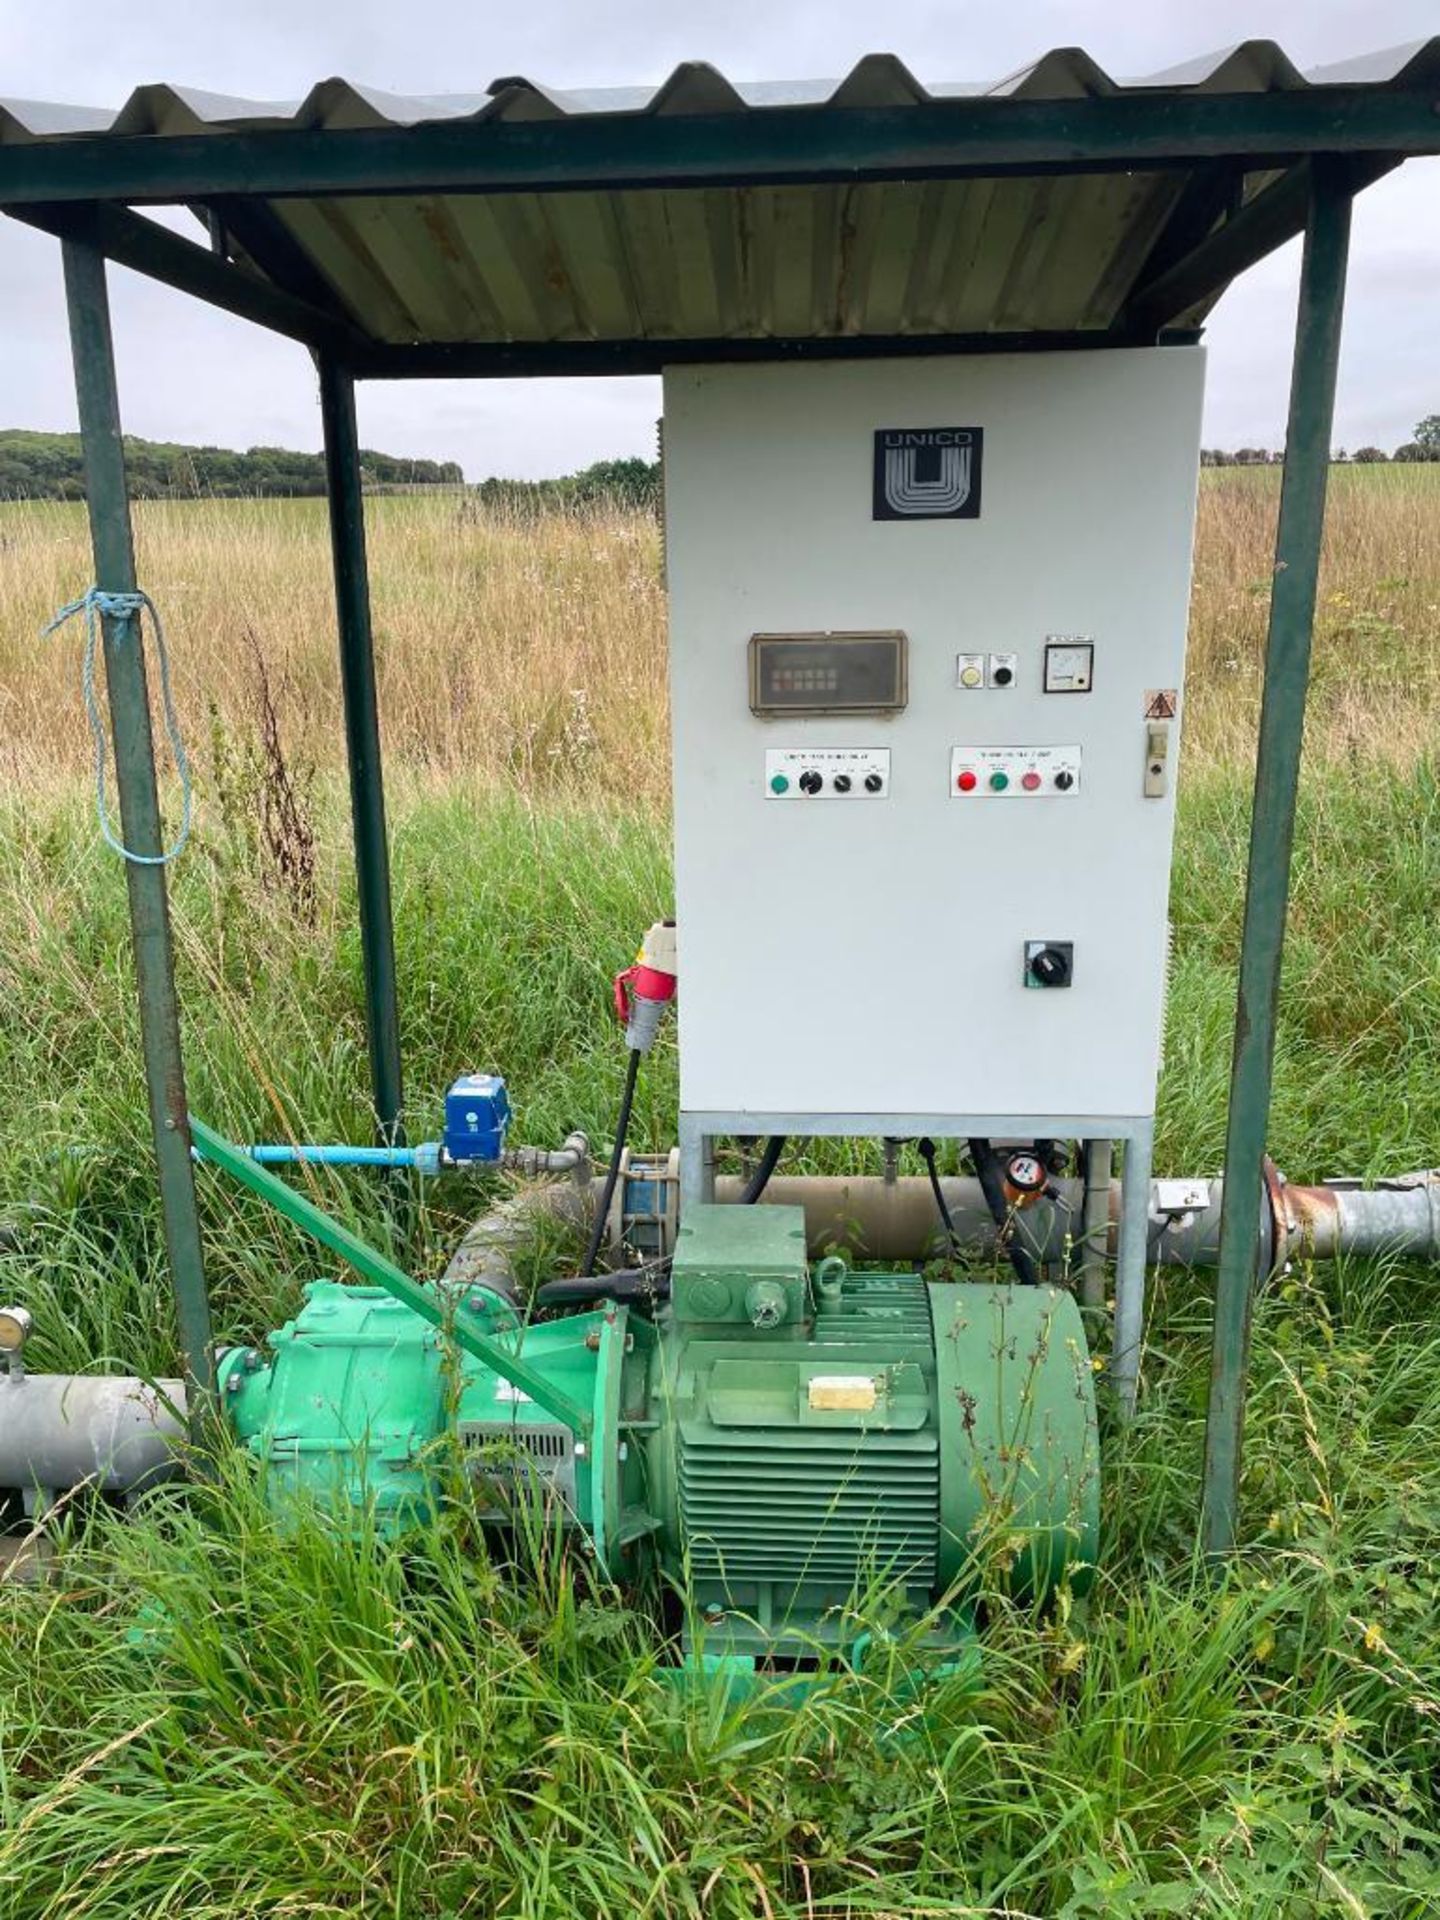 Electric irrigation transfer pump with Unico control panel with auto flow and auto pressure controls - Image 2 of 4